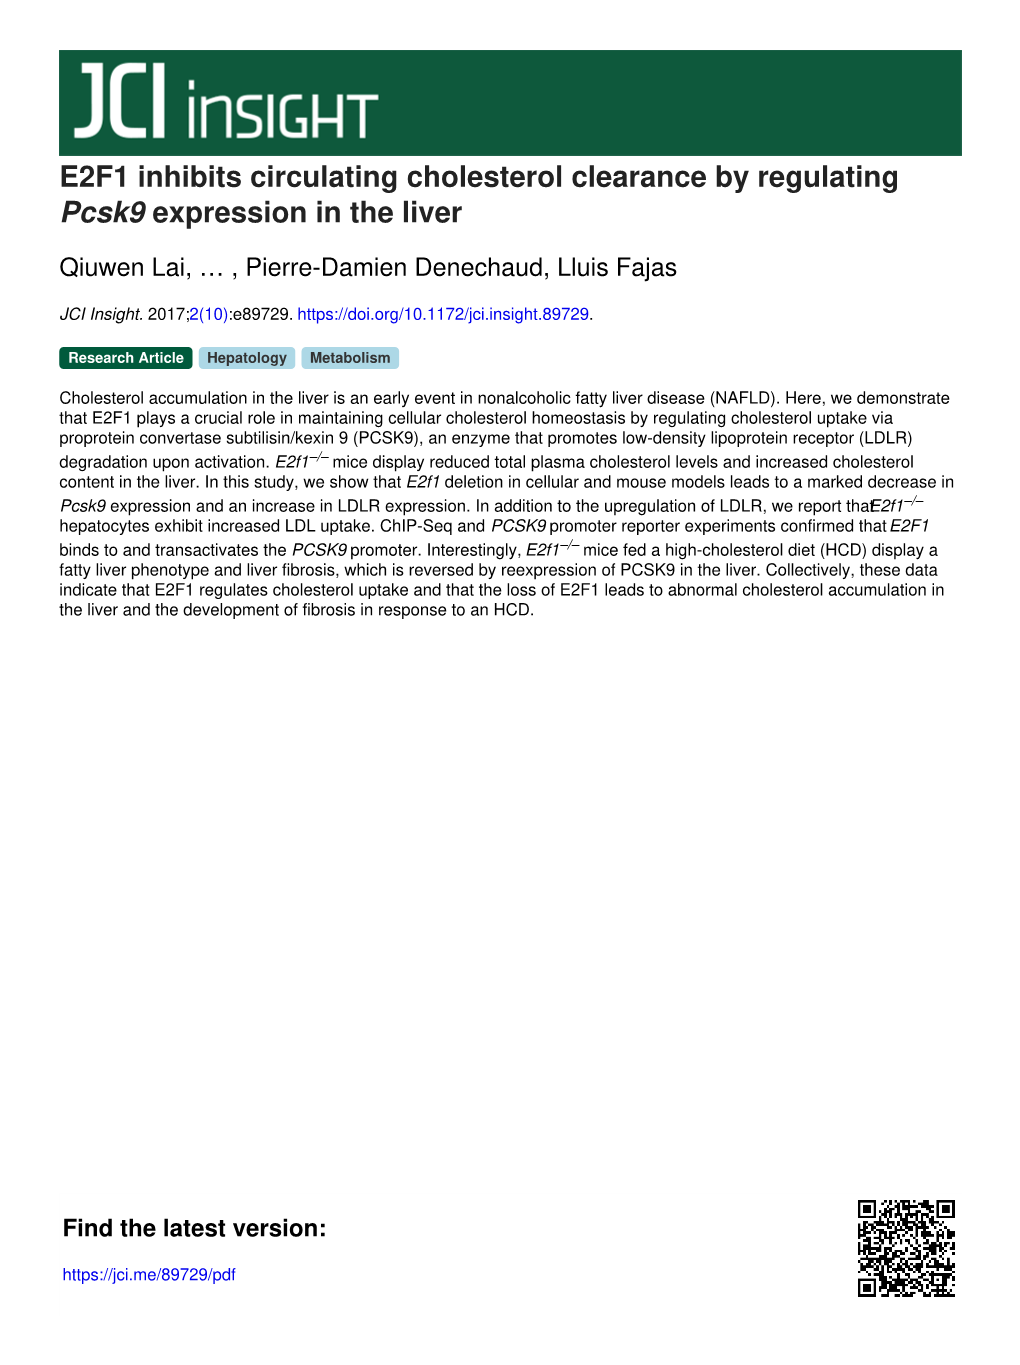 E2F1 Inhibits Circulating Cholesterol Clearance by Regulating Pcsk9 Expression in the Liver